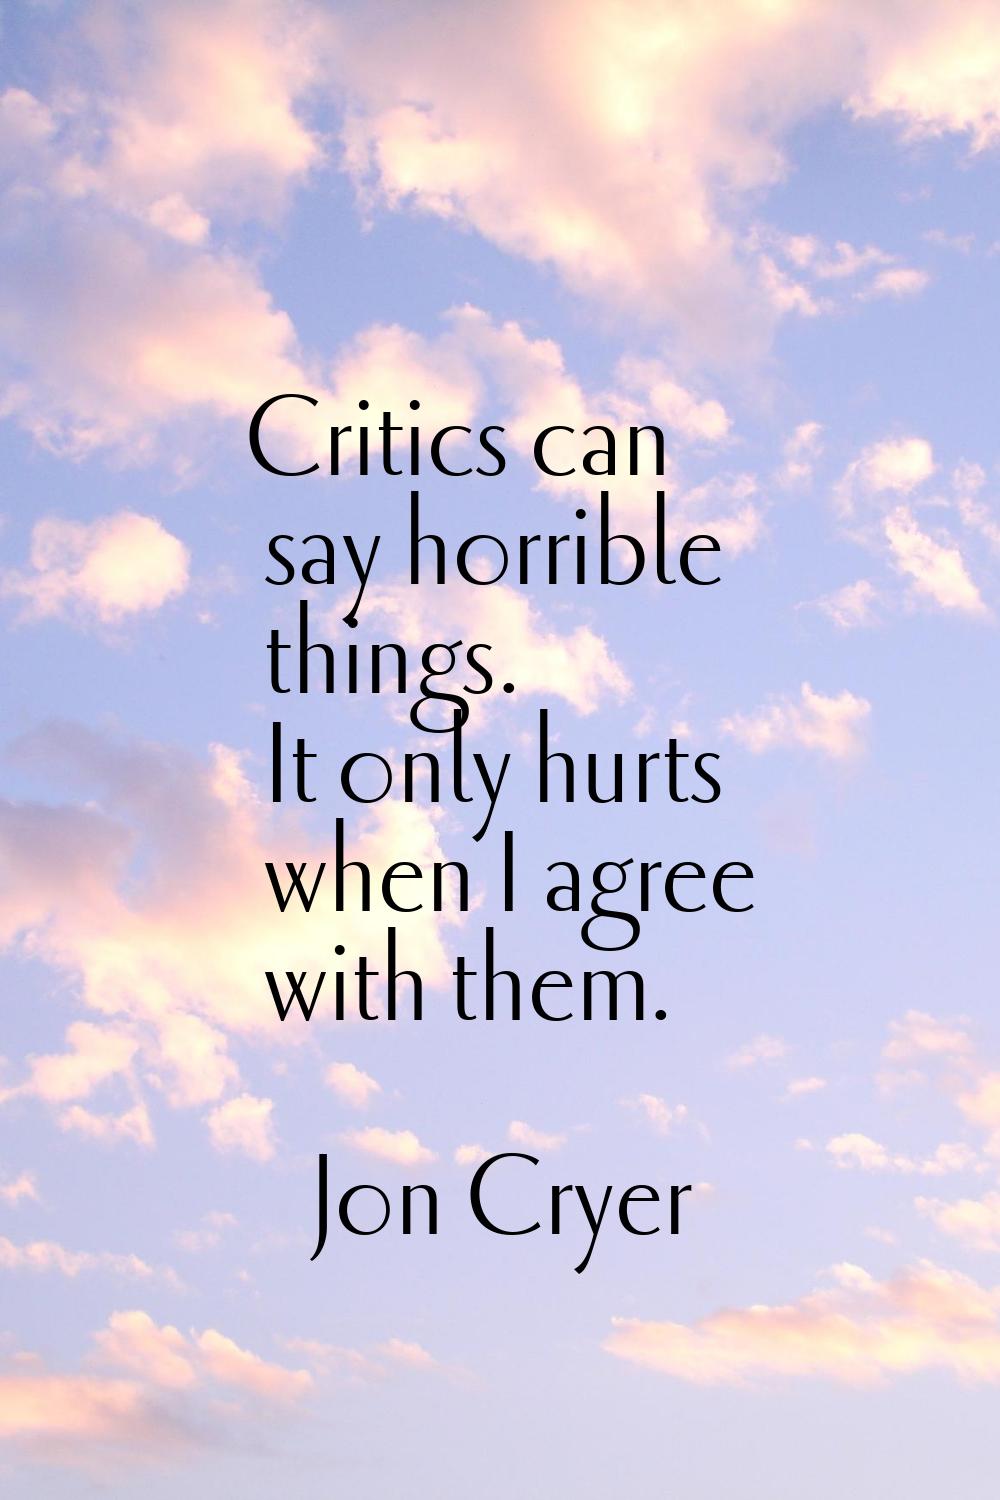 Critics can say horrible things. It only hurts when I agree with them.